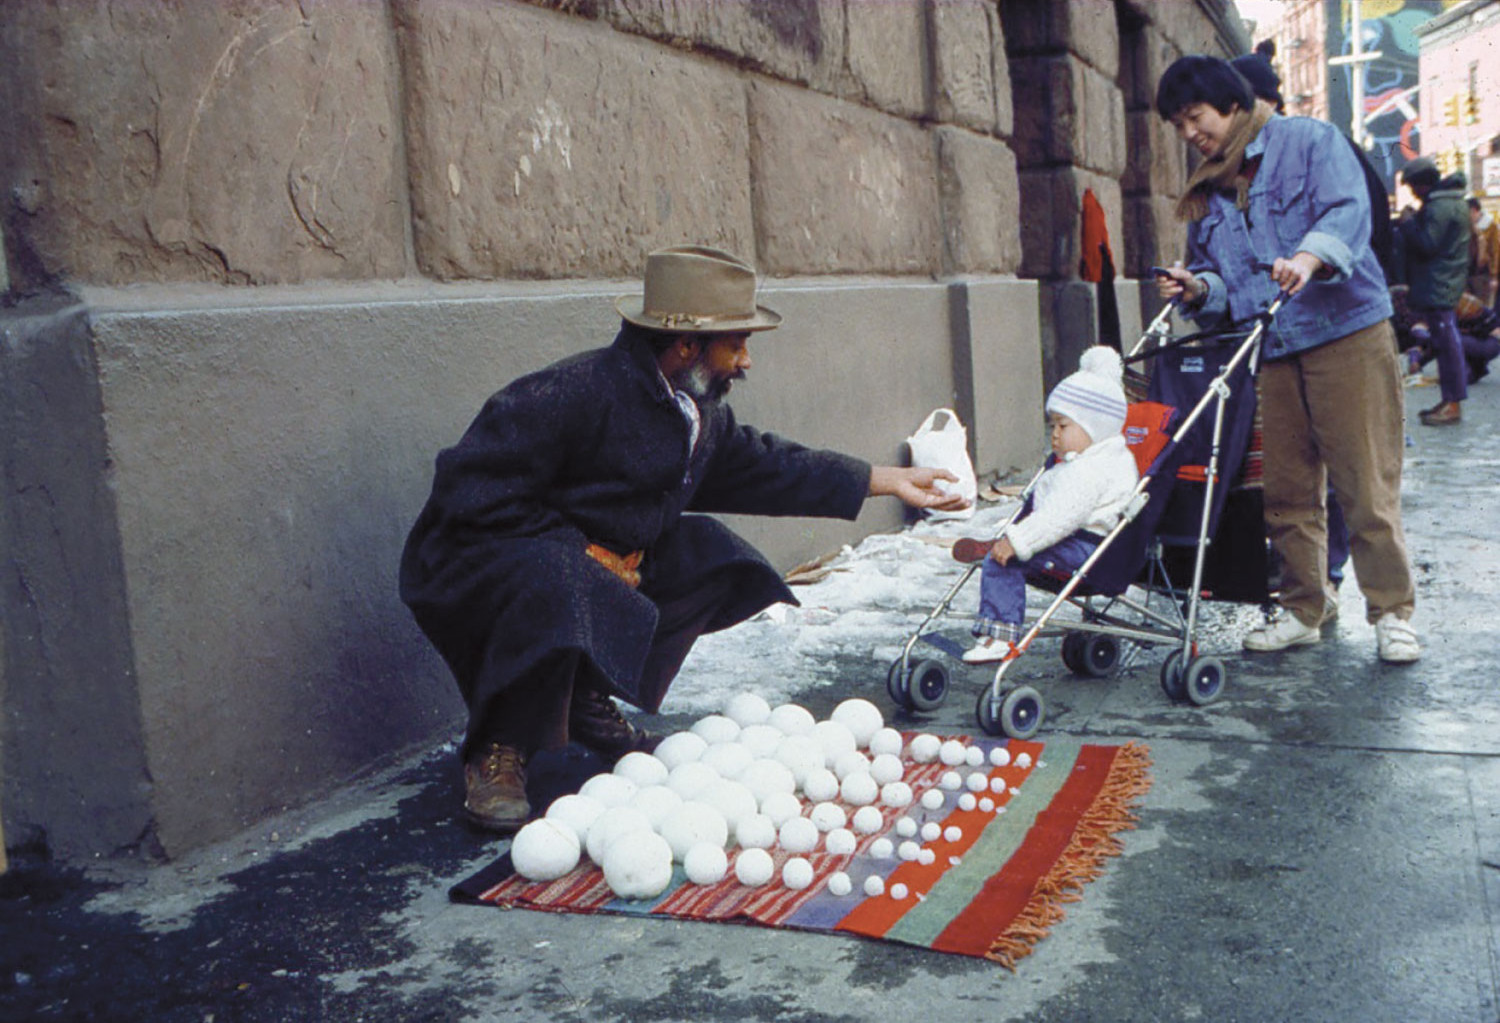 A man crouches down behind lines of snowballs arranged according to size. He passes one snowball to a baby wearing a white coat and hat, sitting in a stroller.